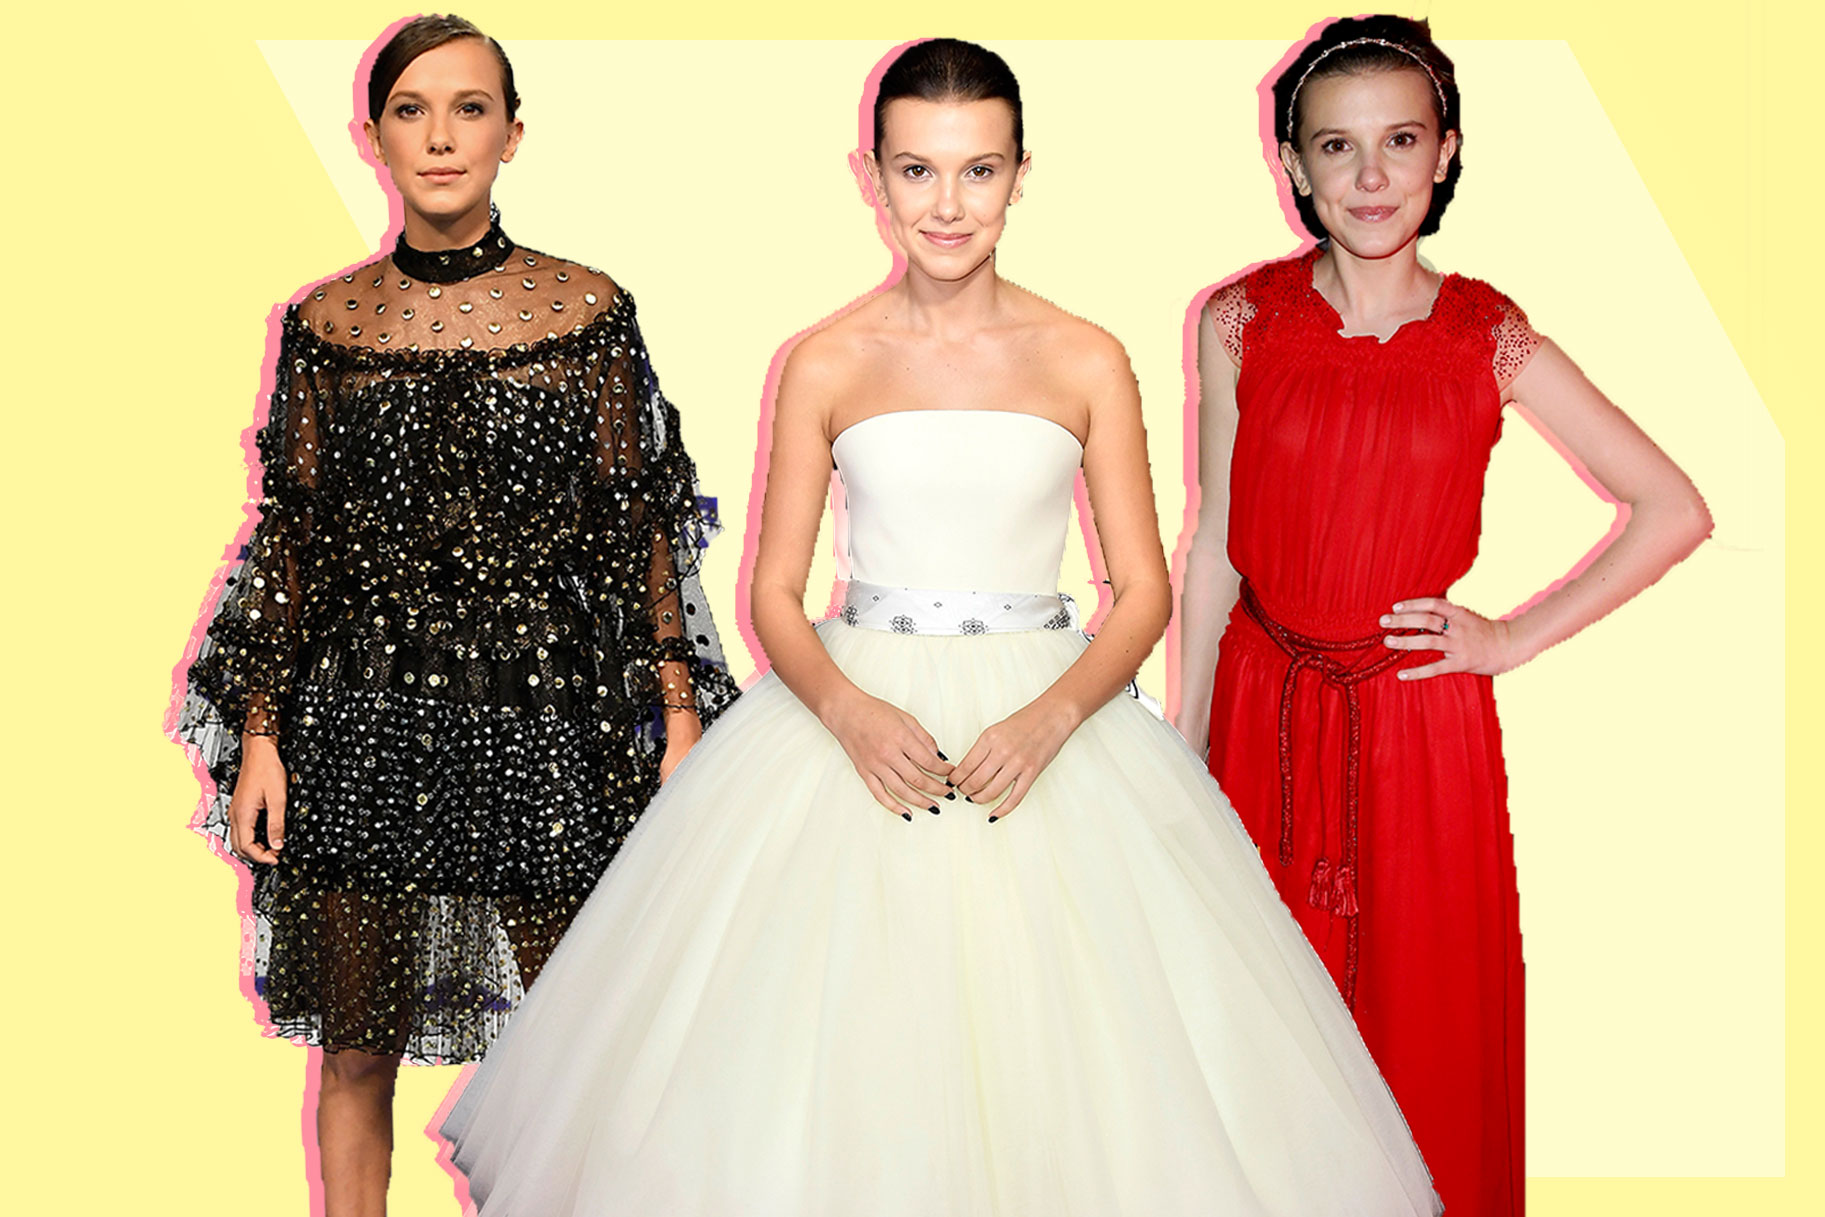 Millie Bobby Brown's Style File